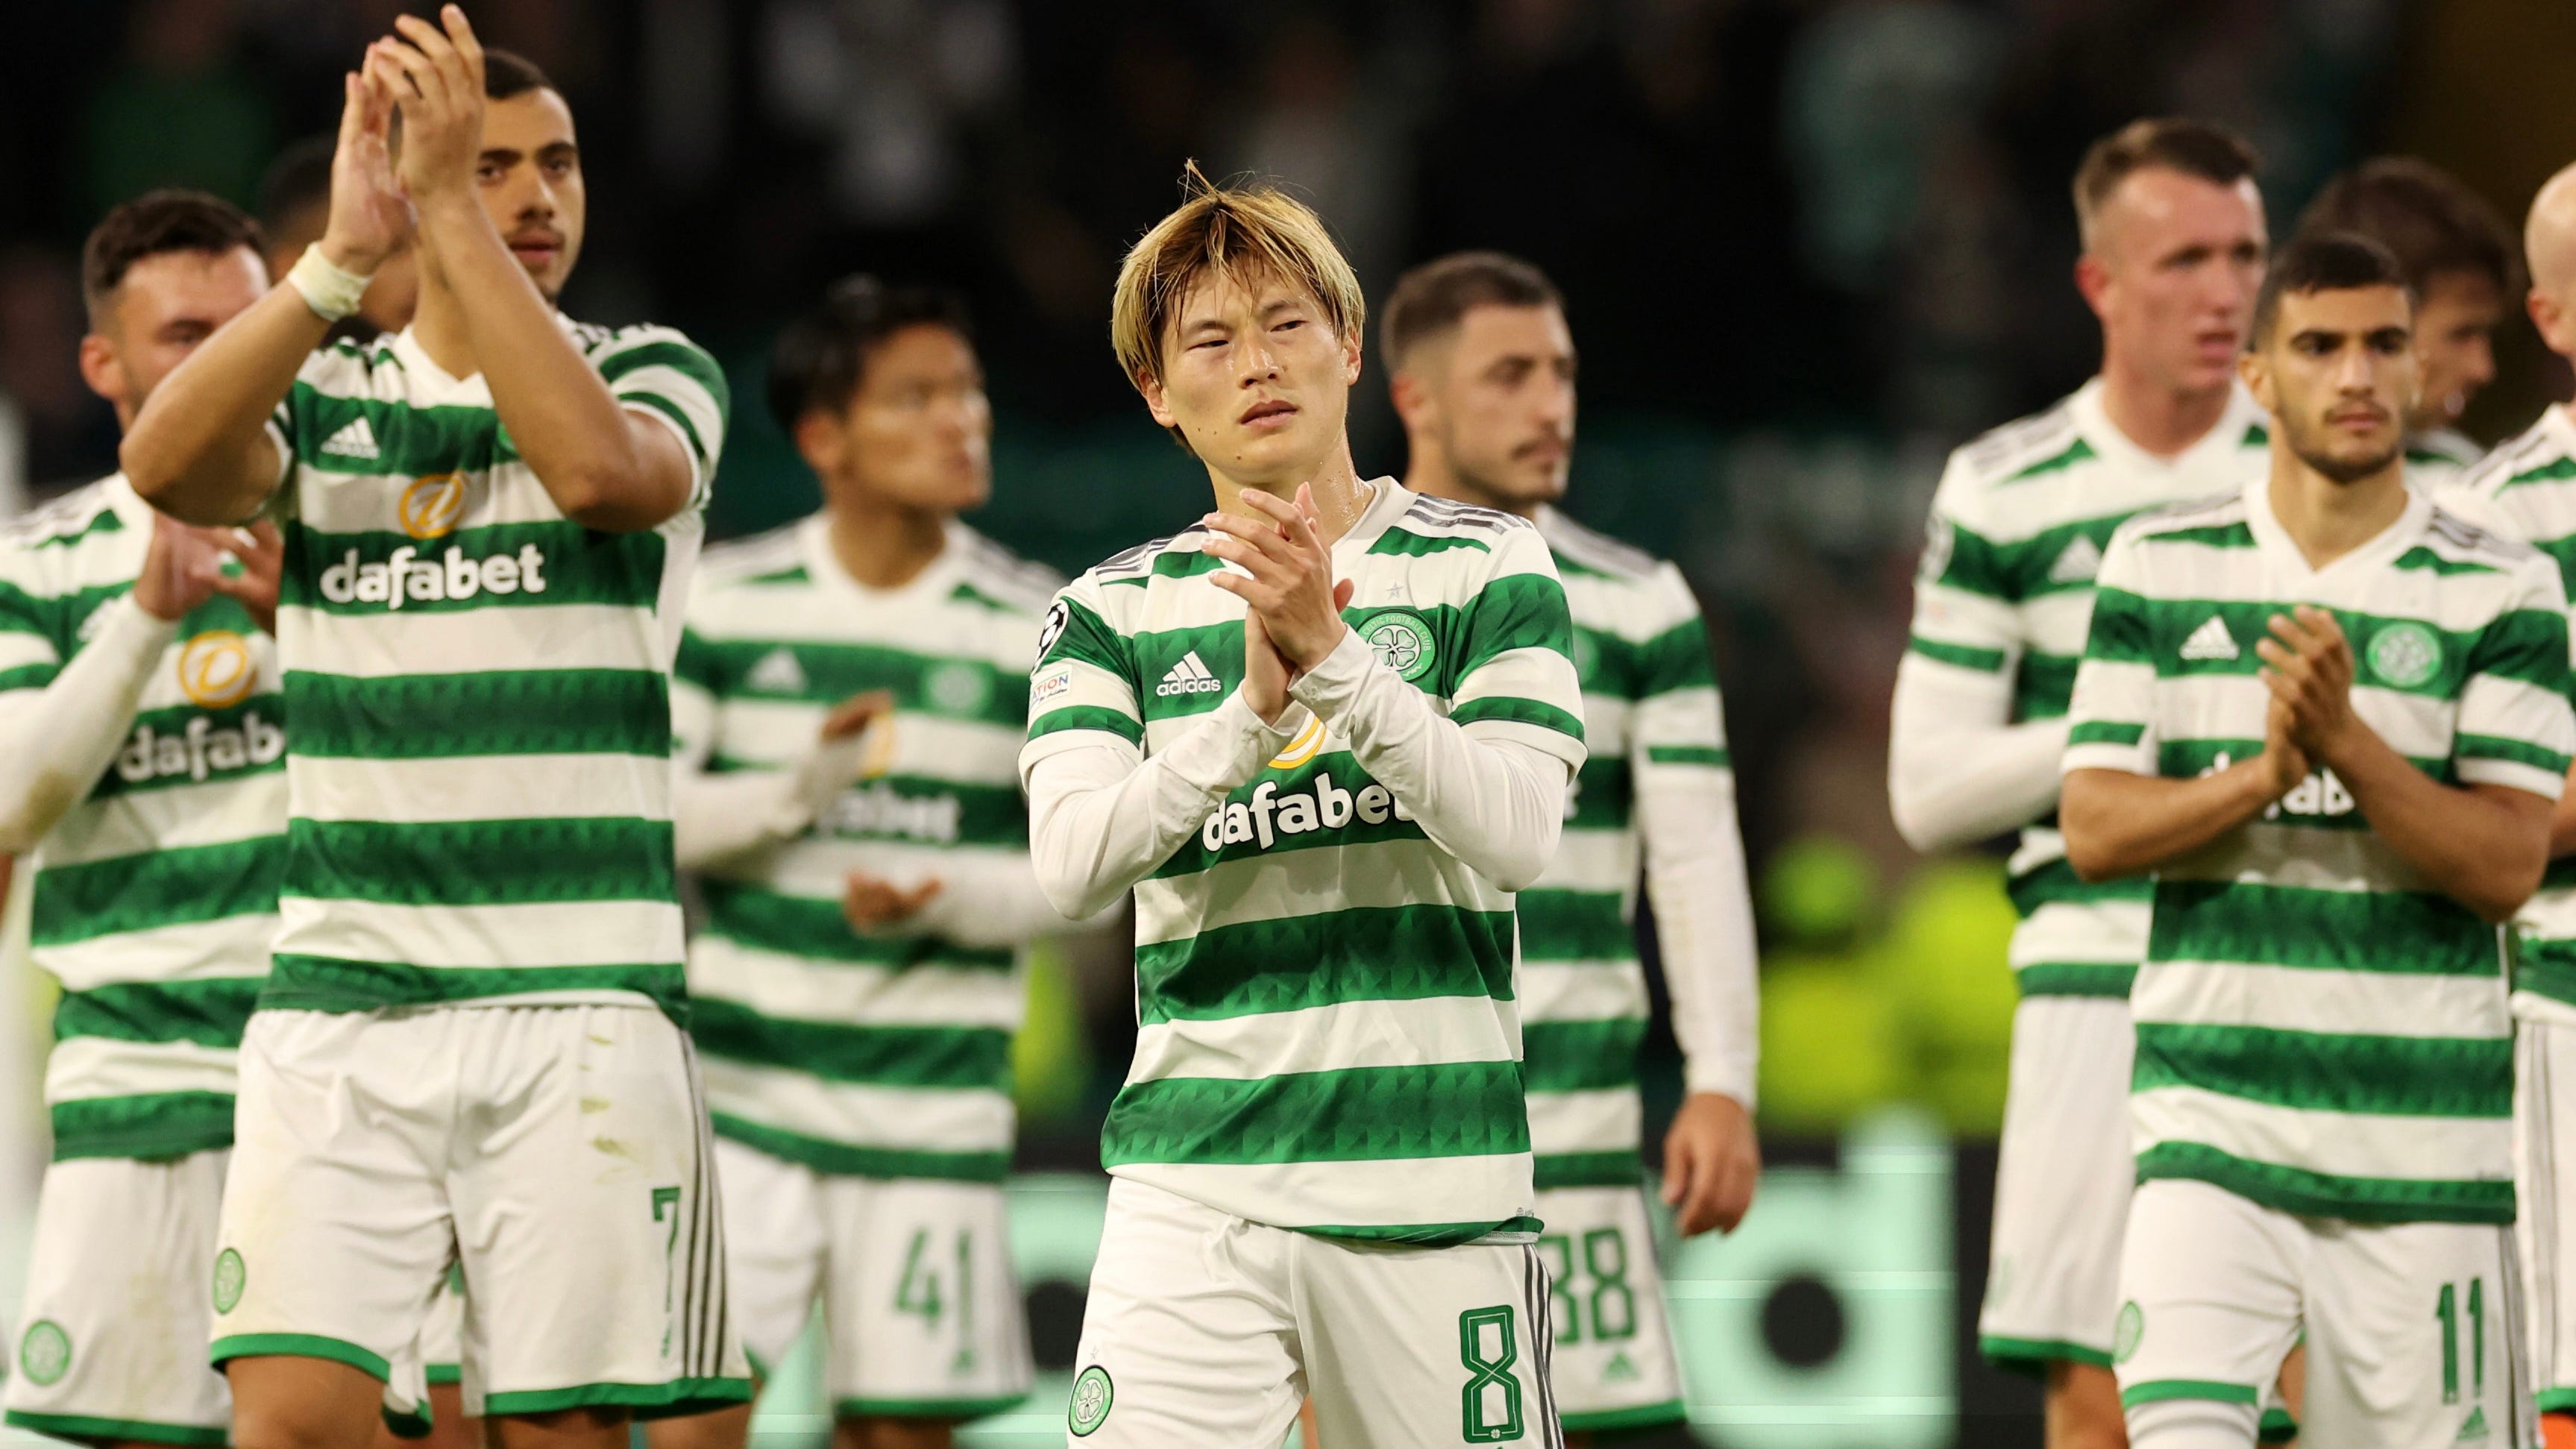 Celtic vs Rangers Where to watch Old Firm online, live stream, TV channels and kick-off time Goal UK